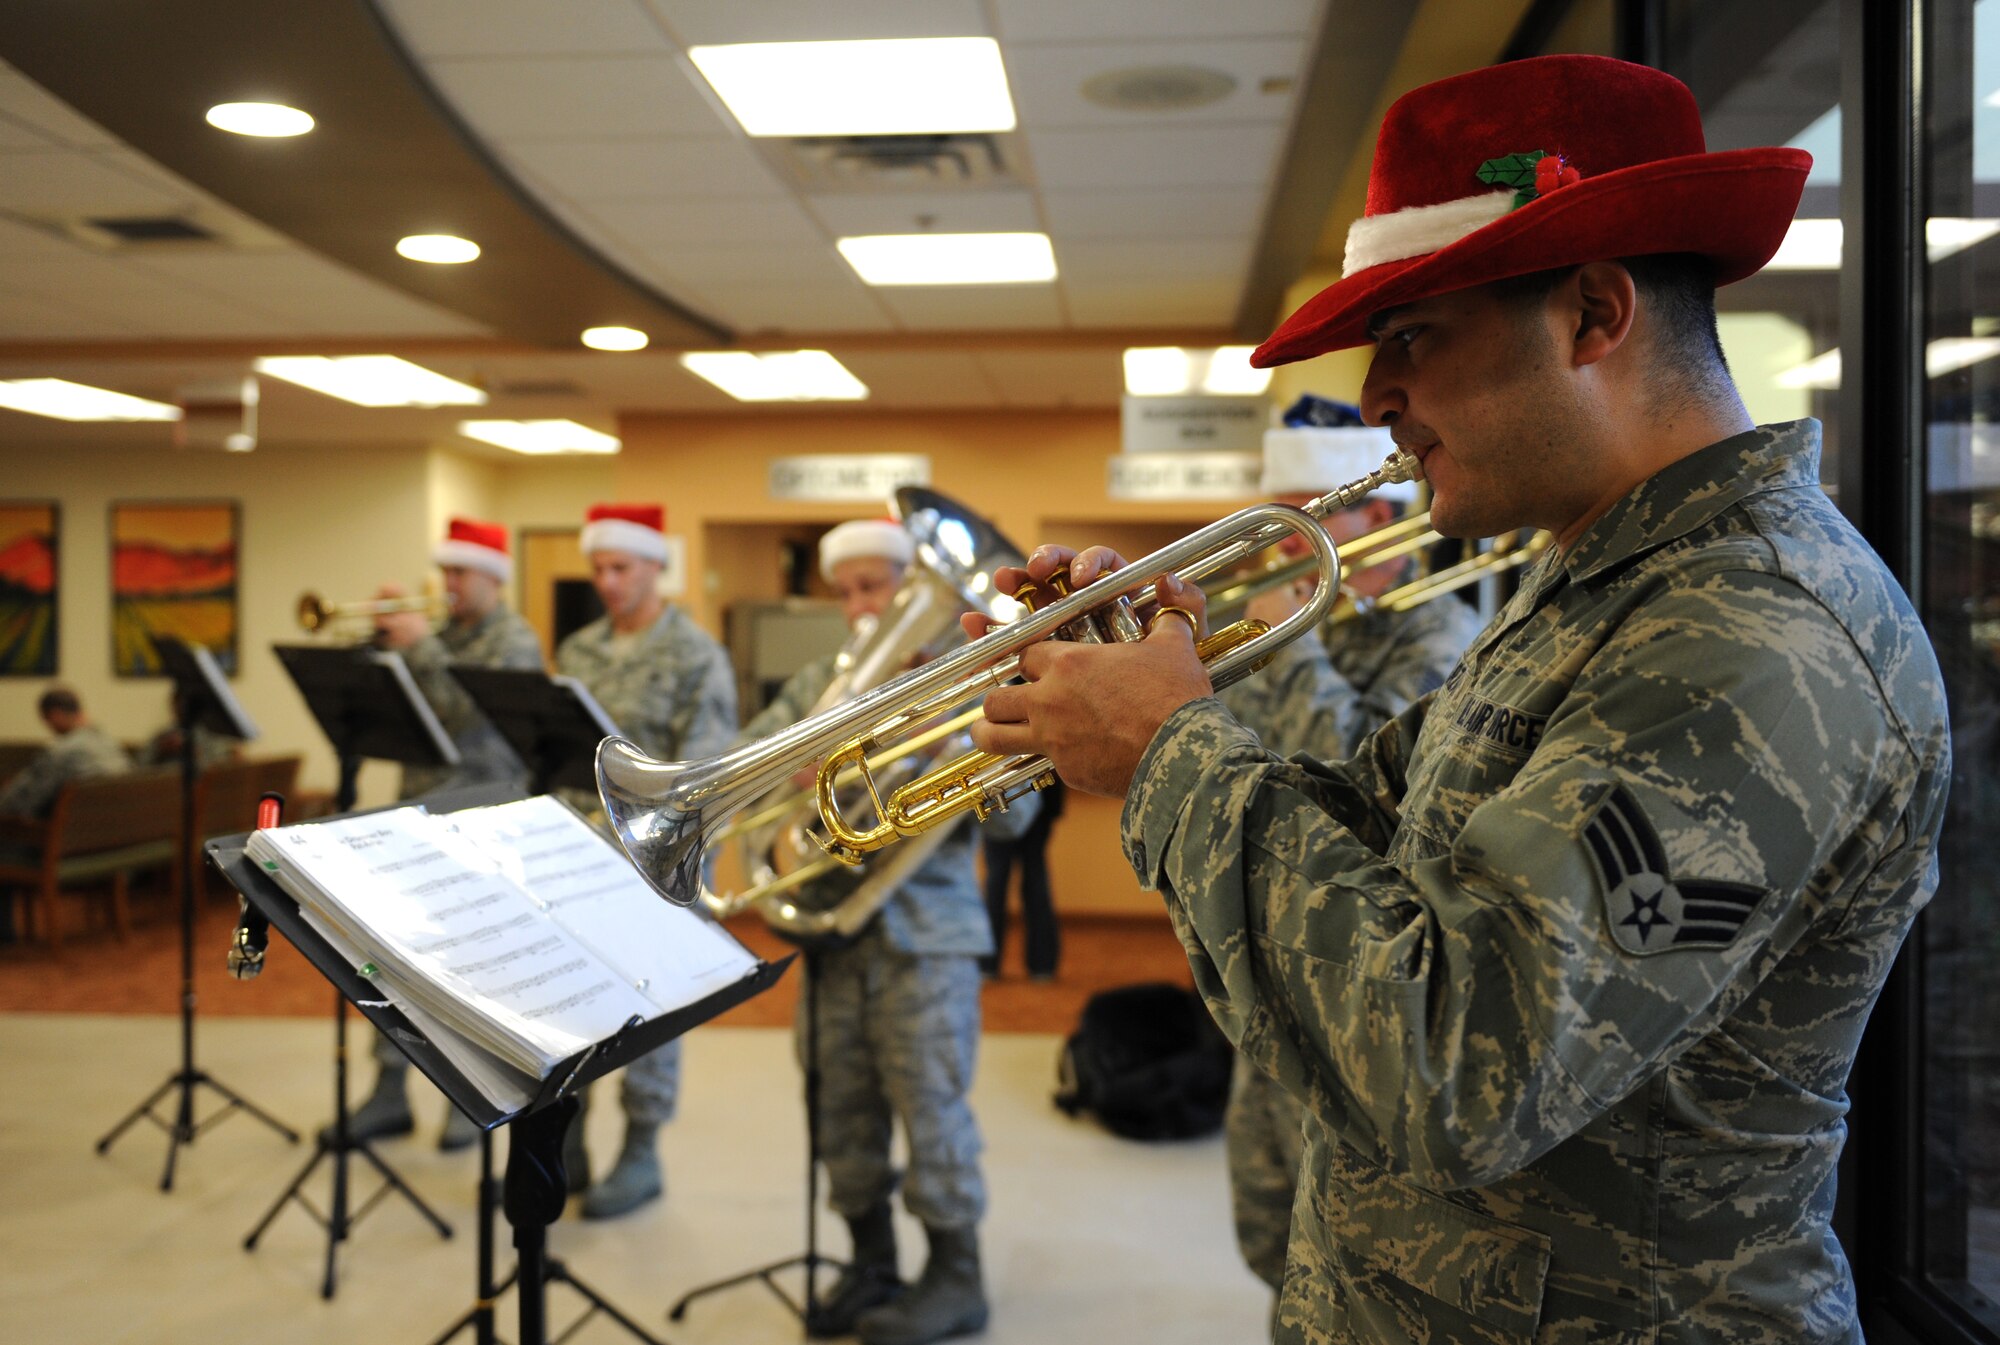 Members of Travis Brass perform Christmas songs for Team Beale at the base clinic, Dec. 13, 2012. The band performs multiple holiday shows across the Western states. (U.S. Air Force photo by Staff Sgt. Robert M. Trujillo/Released)